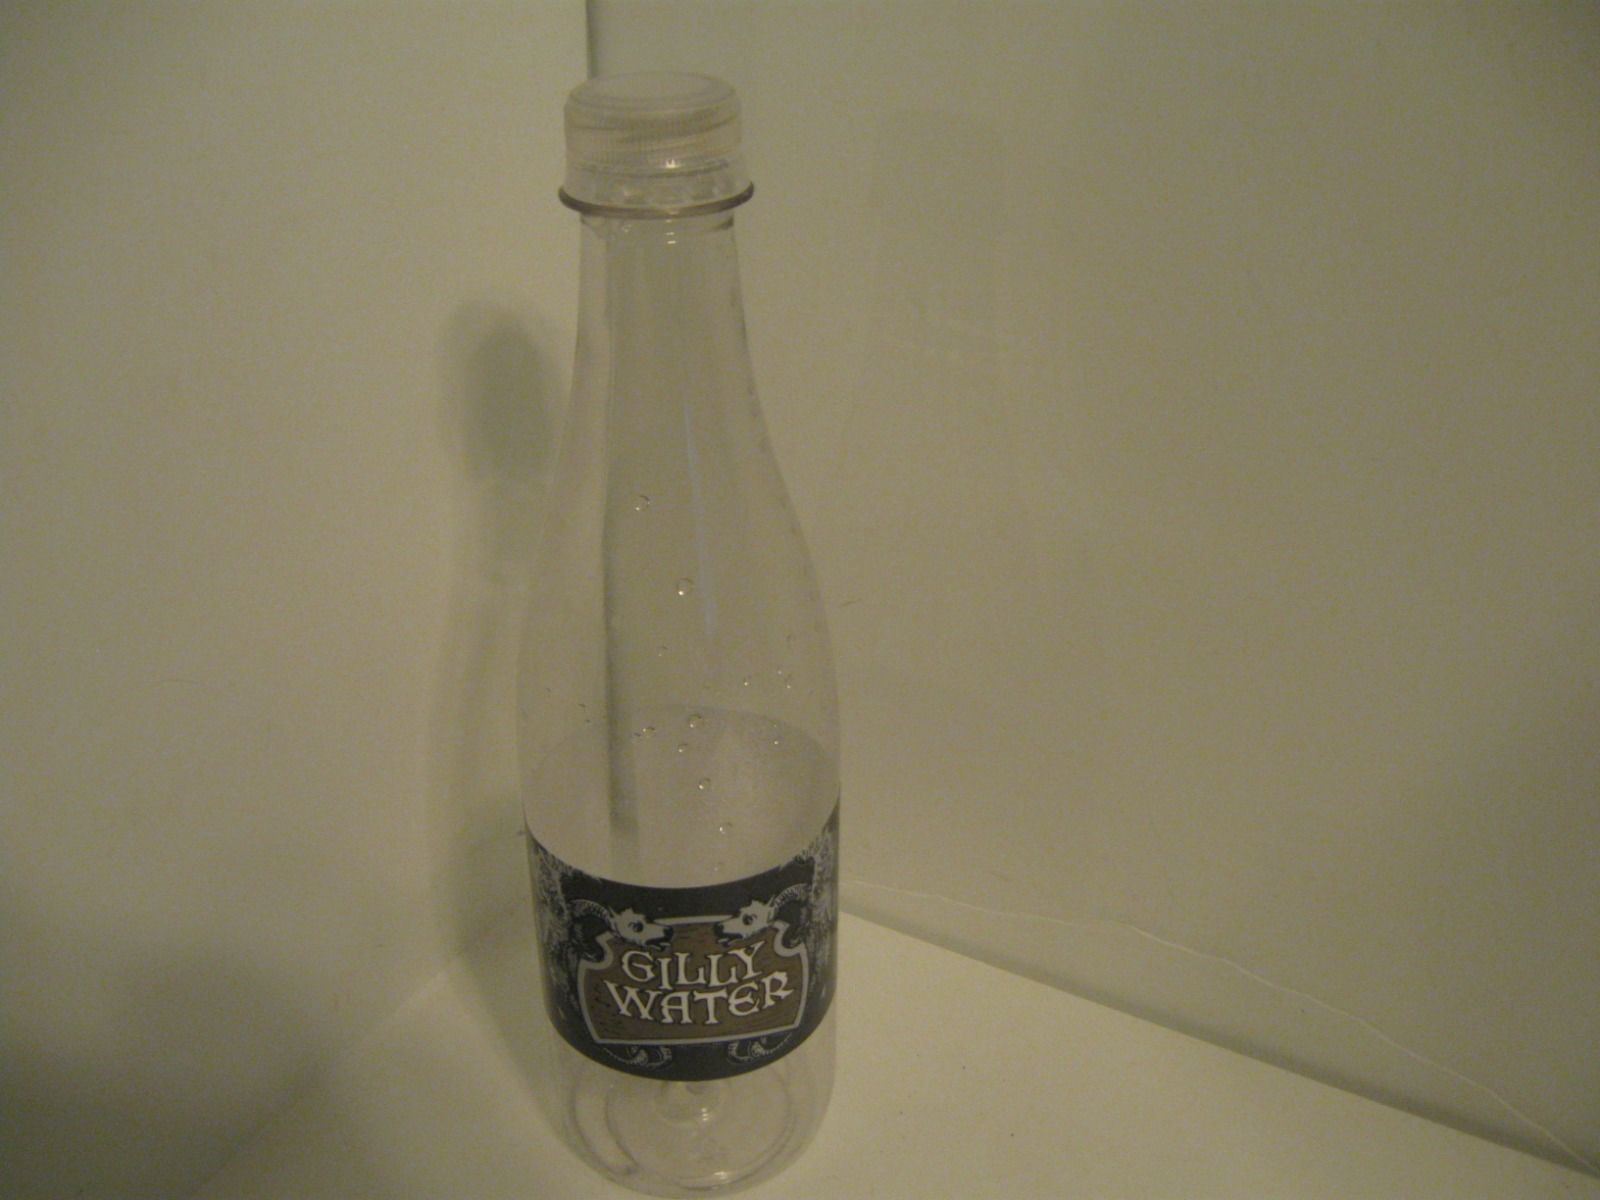 4 Gilly Water Bottle Diagon Alley Harry Potter Wizarding World Universal Studios 